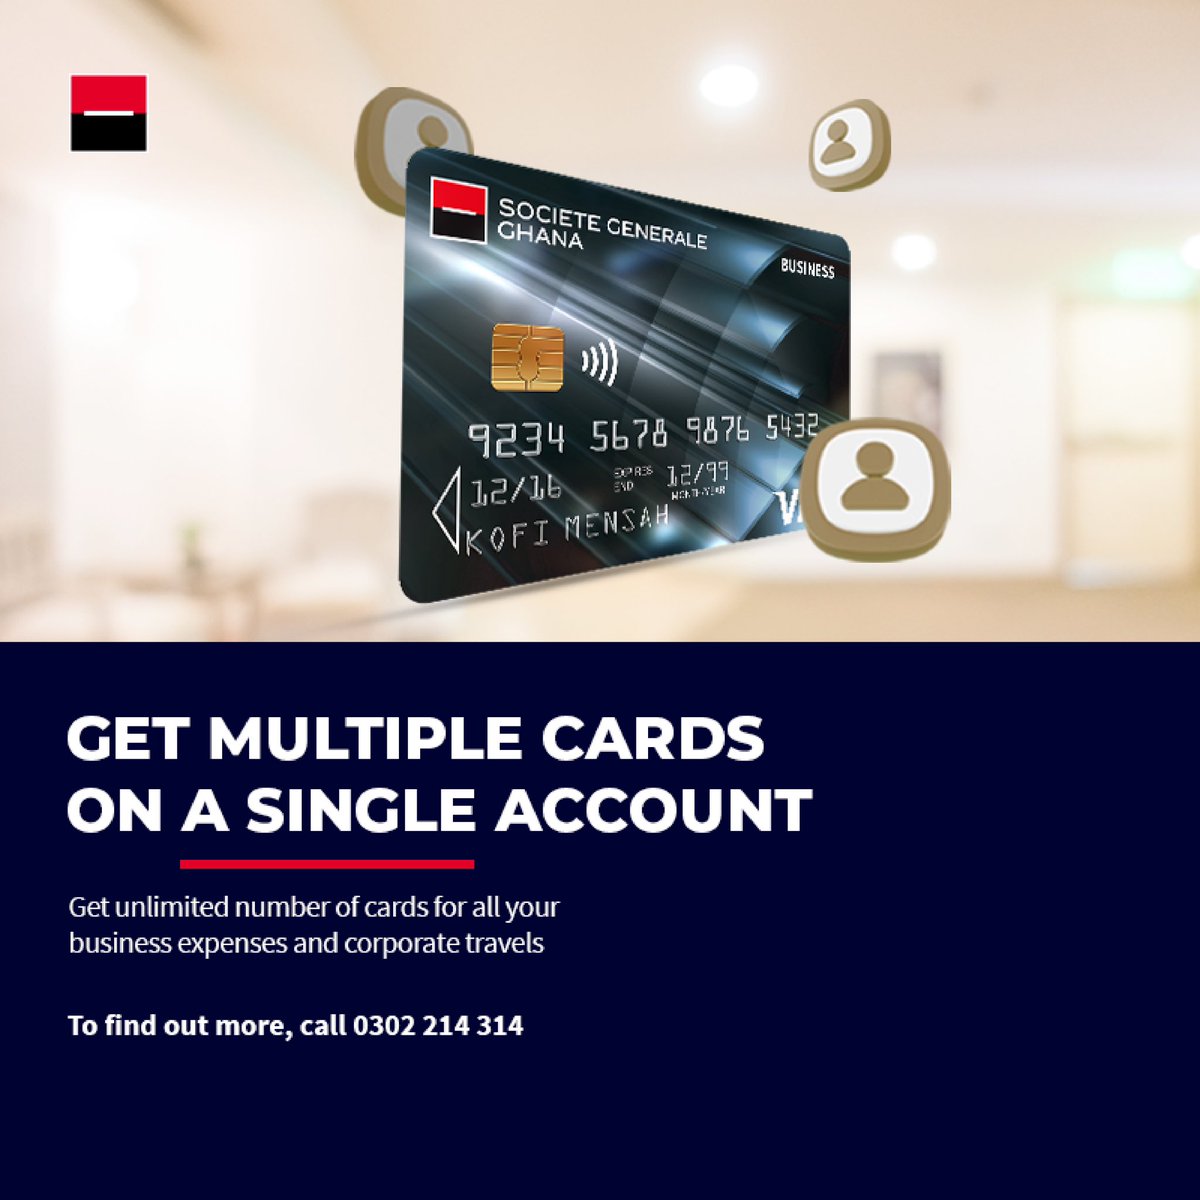 Get unlimited number of cards for all your business expenses and corporate travels.

Learn more: societegenerale.com.gh/en/individual/… 

To find out more, call 0302 214 314

#SGGhana #Banking #PersonalBanking #VisaCards